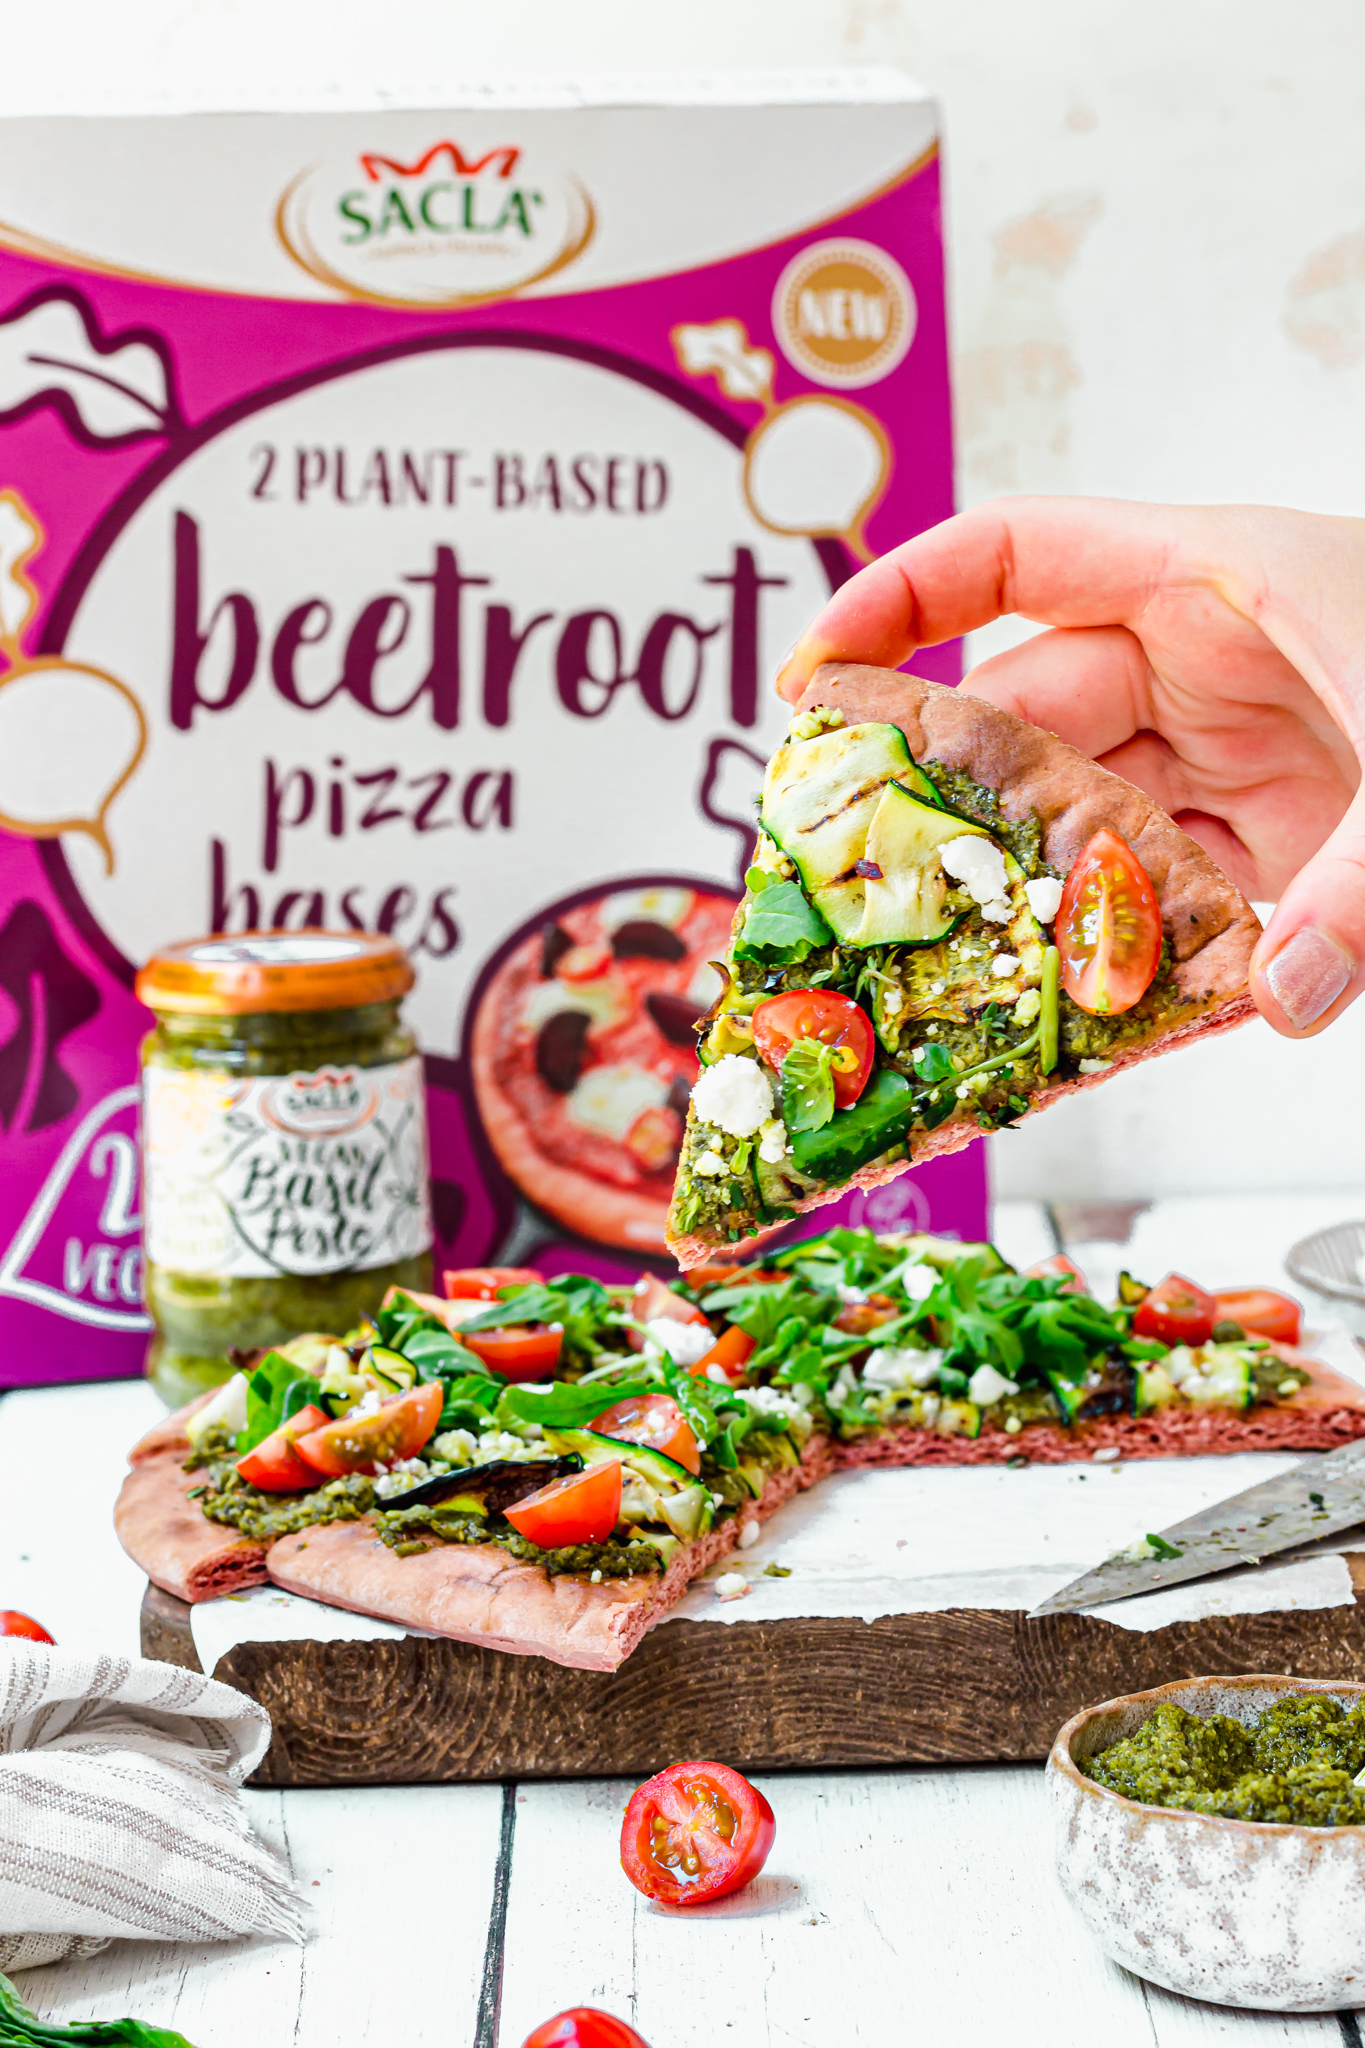 Beetroot Pesto and Courgette Pizza with Feta